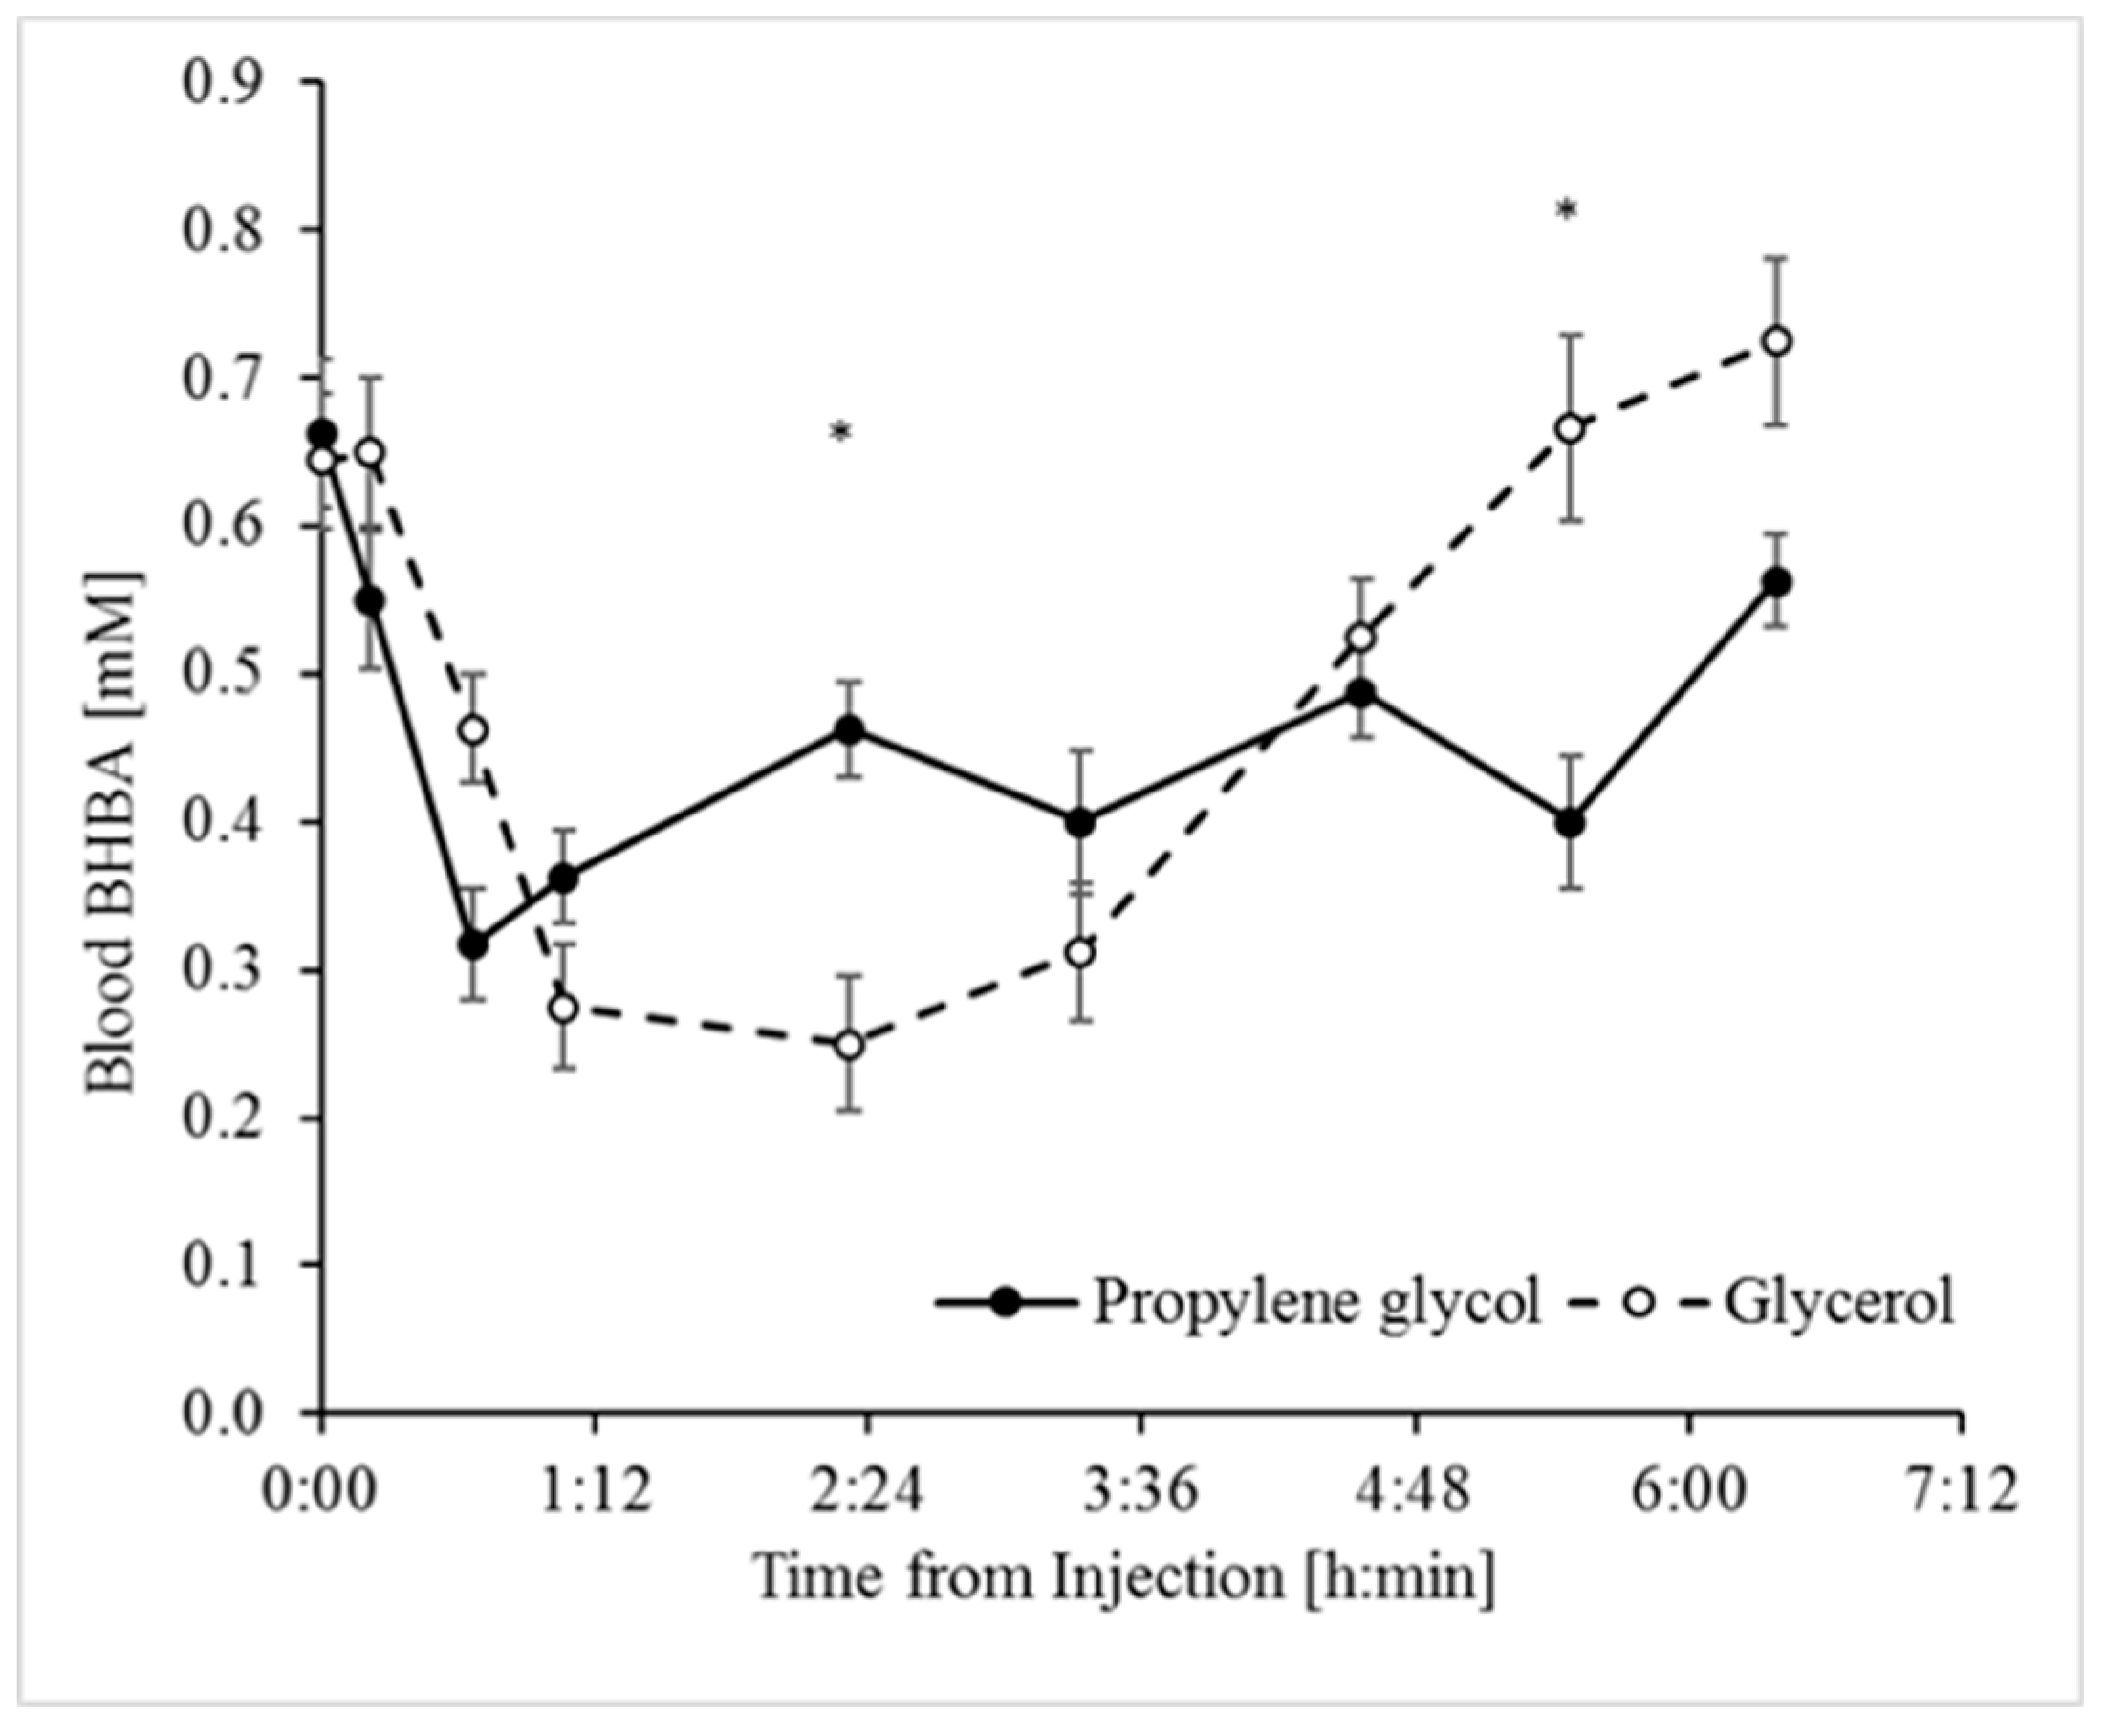 Animals Free Full Text Intravenous Infusions Of Glycerol Versus Propylene Glycol For The Regulation Of Negative Energy Balance In Sheep A Randomized Trial,Historic Houses For Sale In Nc